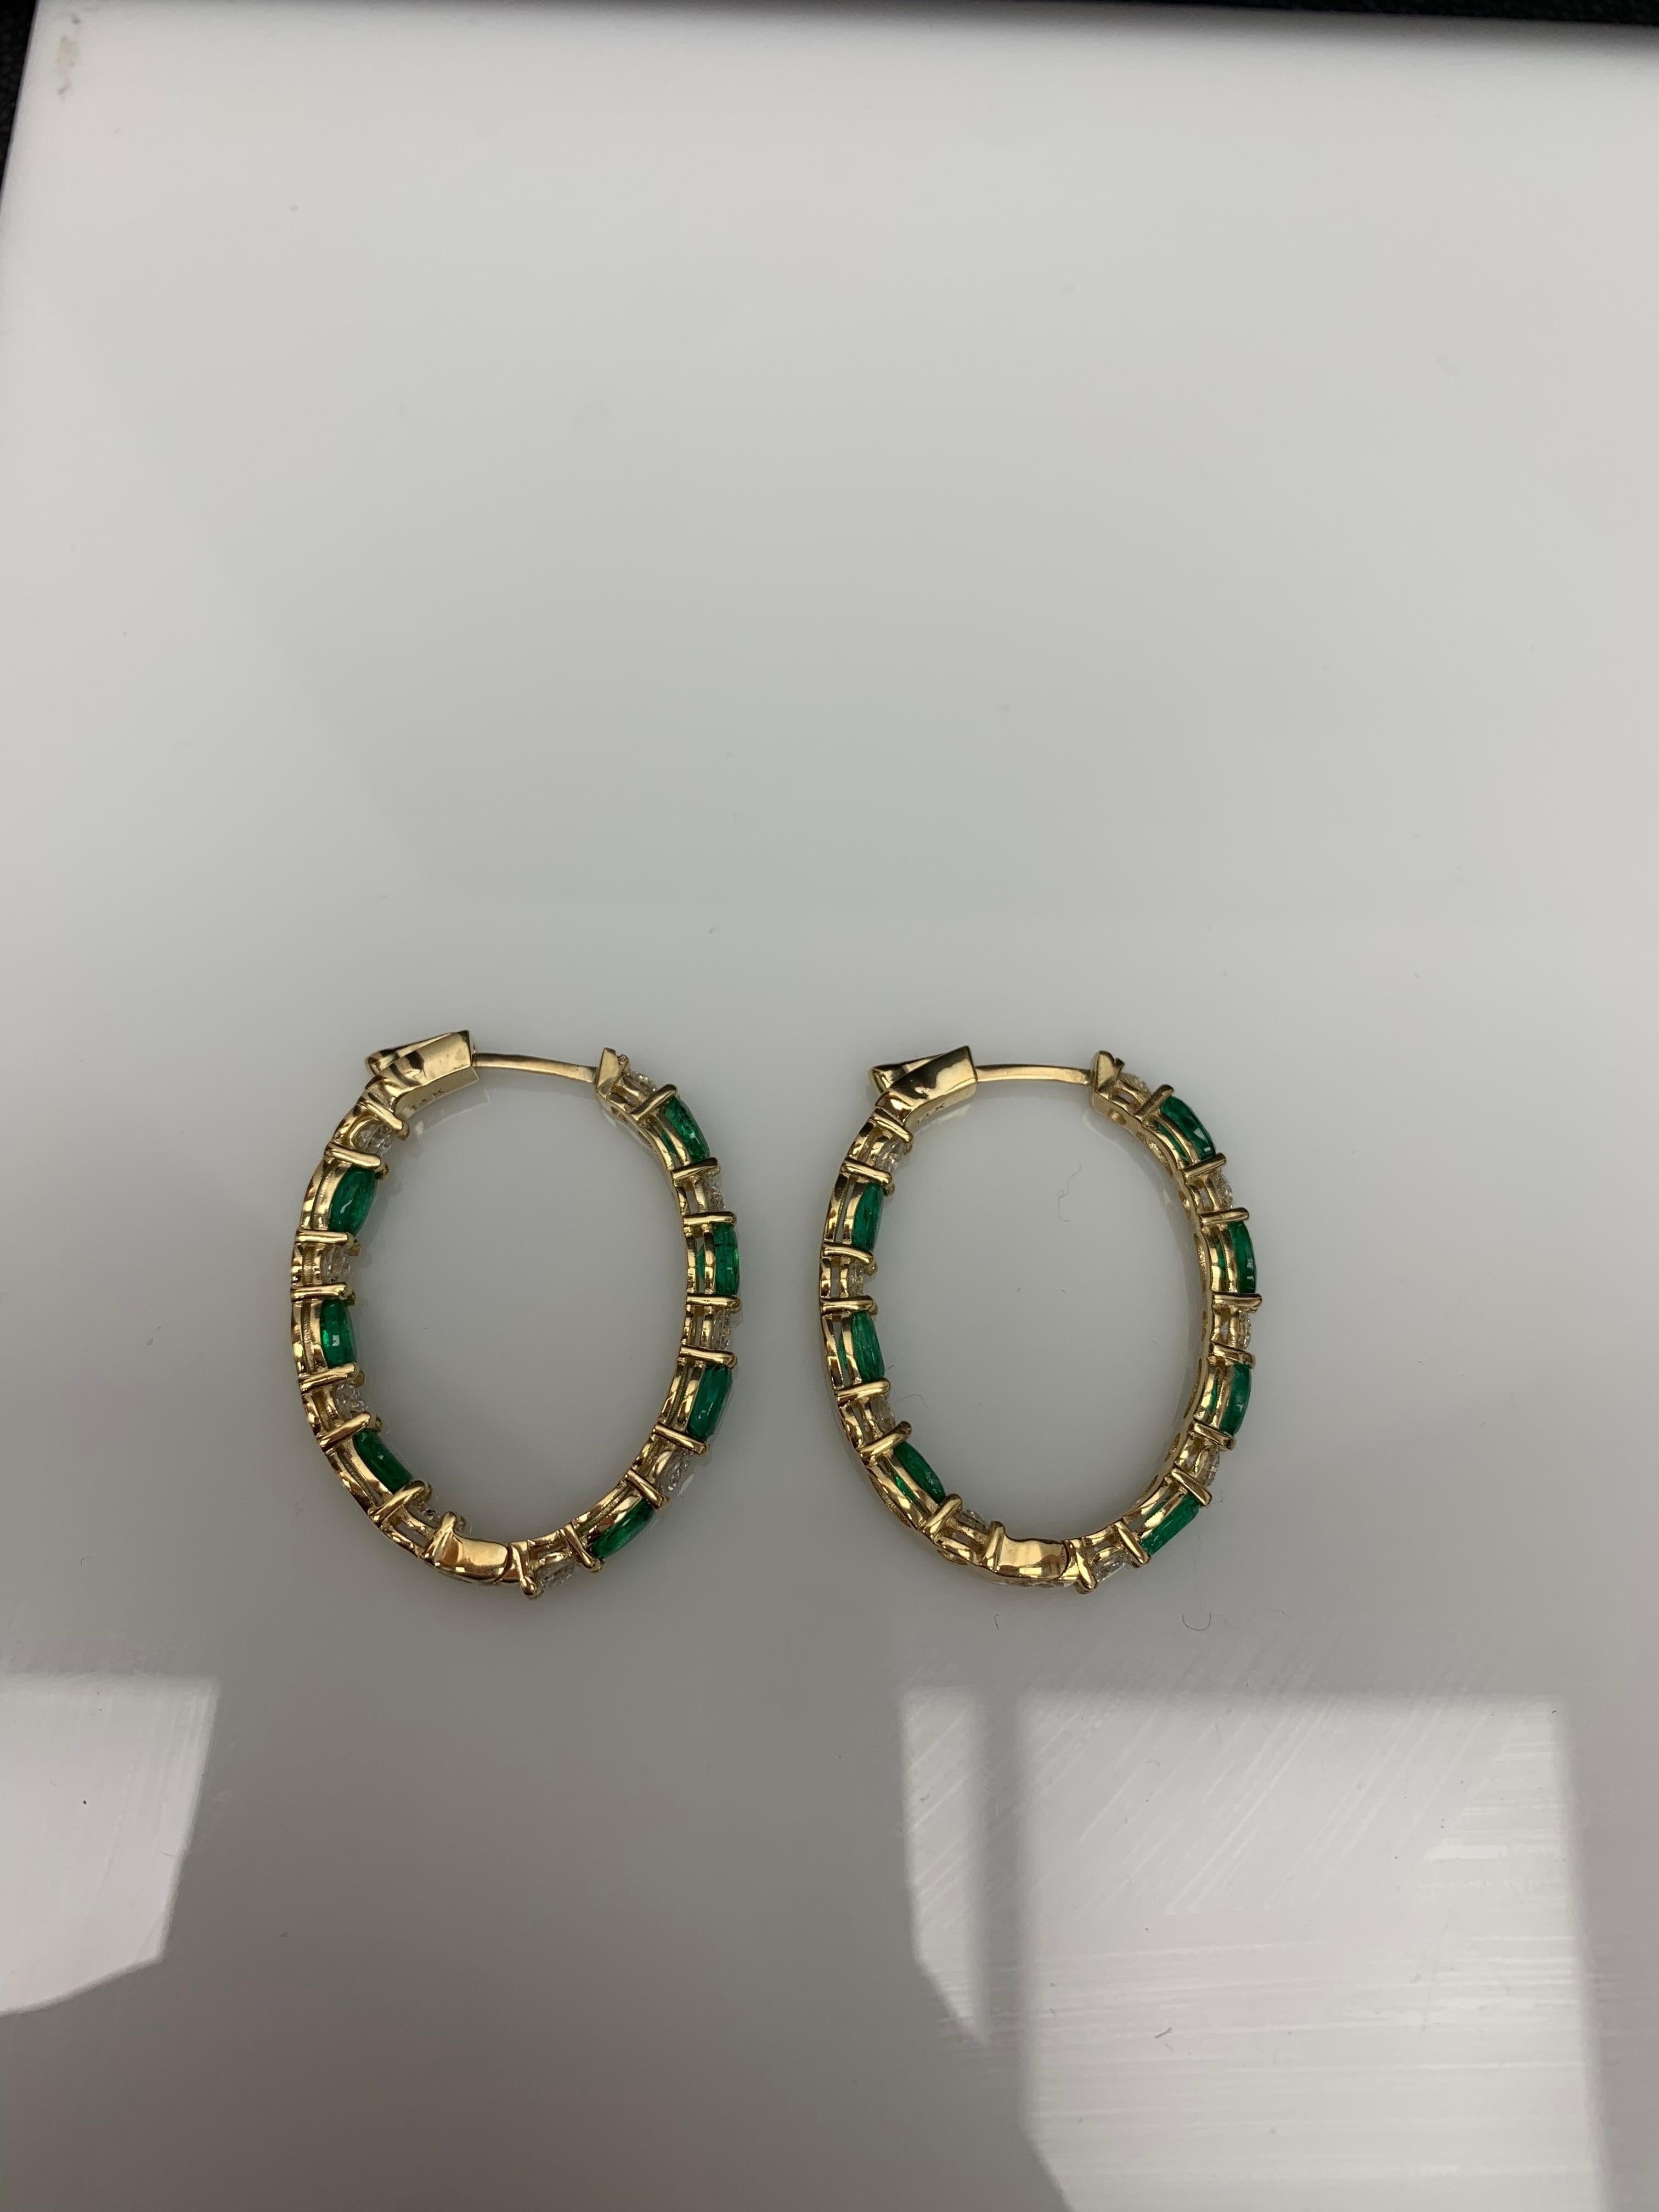 3.13 Carat Oval Cut Emerald and Diamond Hoop Earrings in 14K Yellow Gold For Sale 3